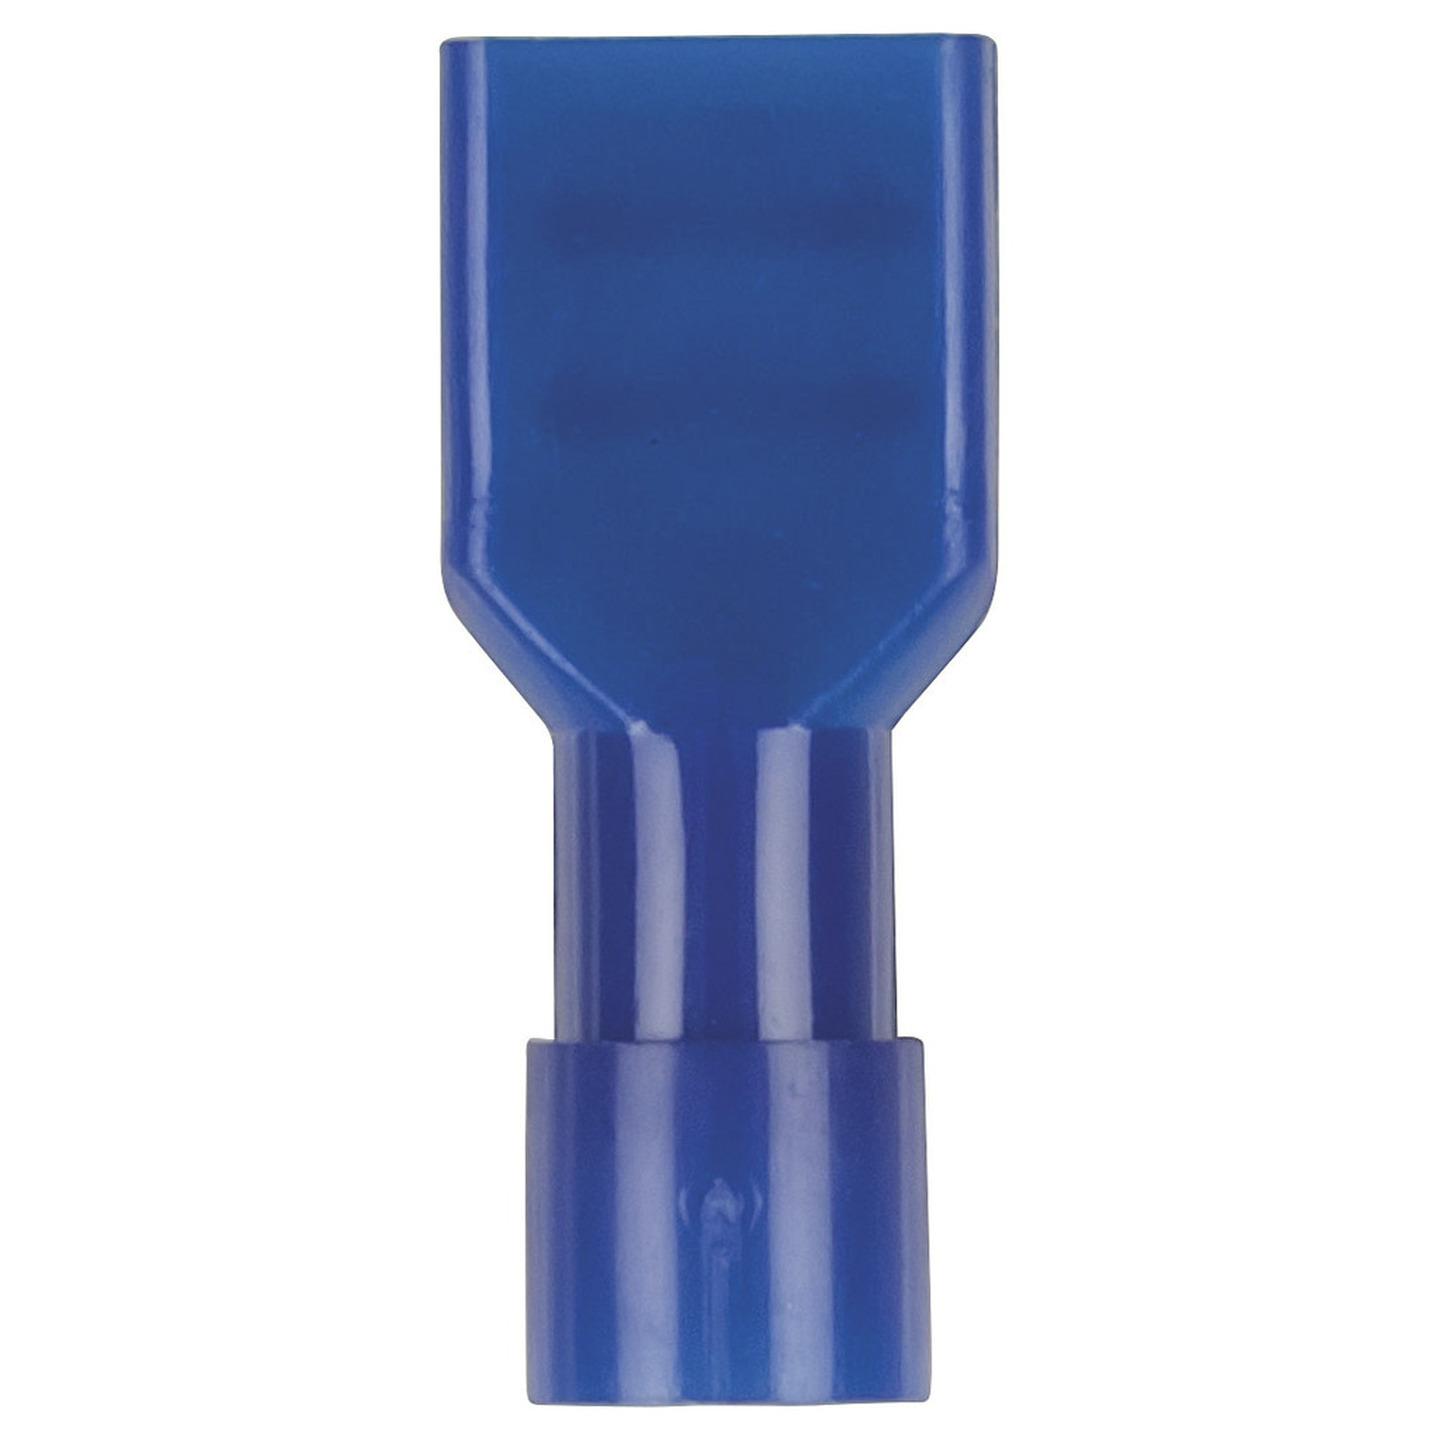 Fully Insulated Female Spade - Blue - Pack of 8